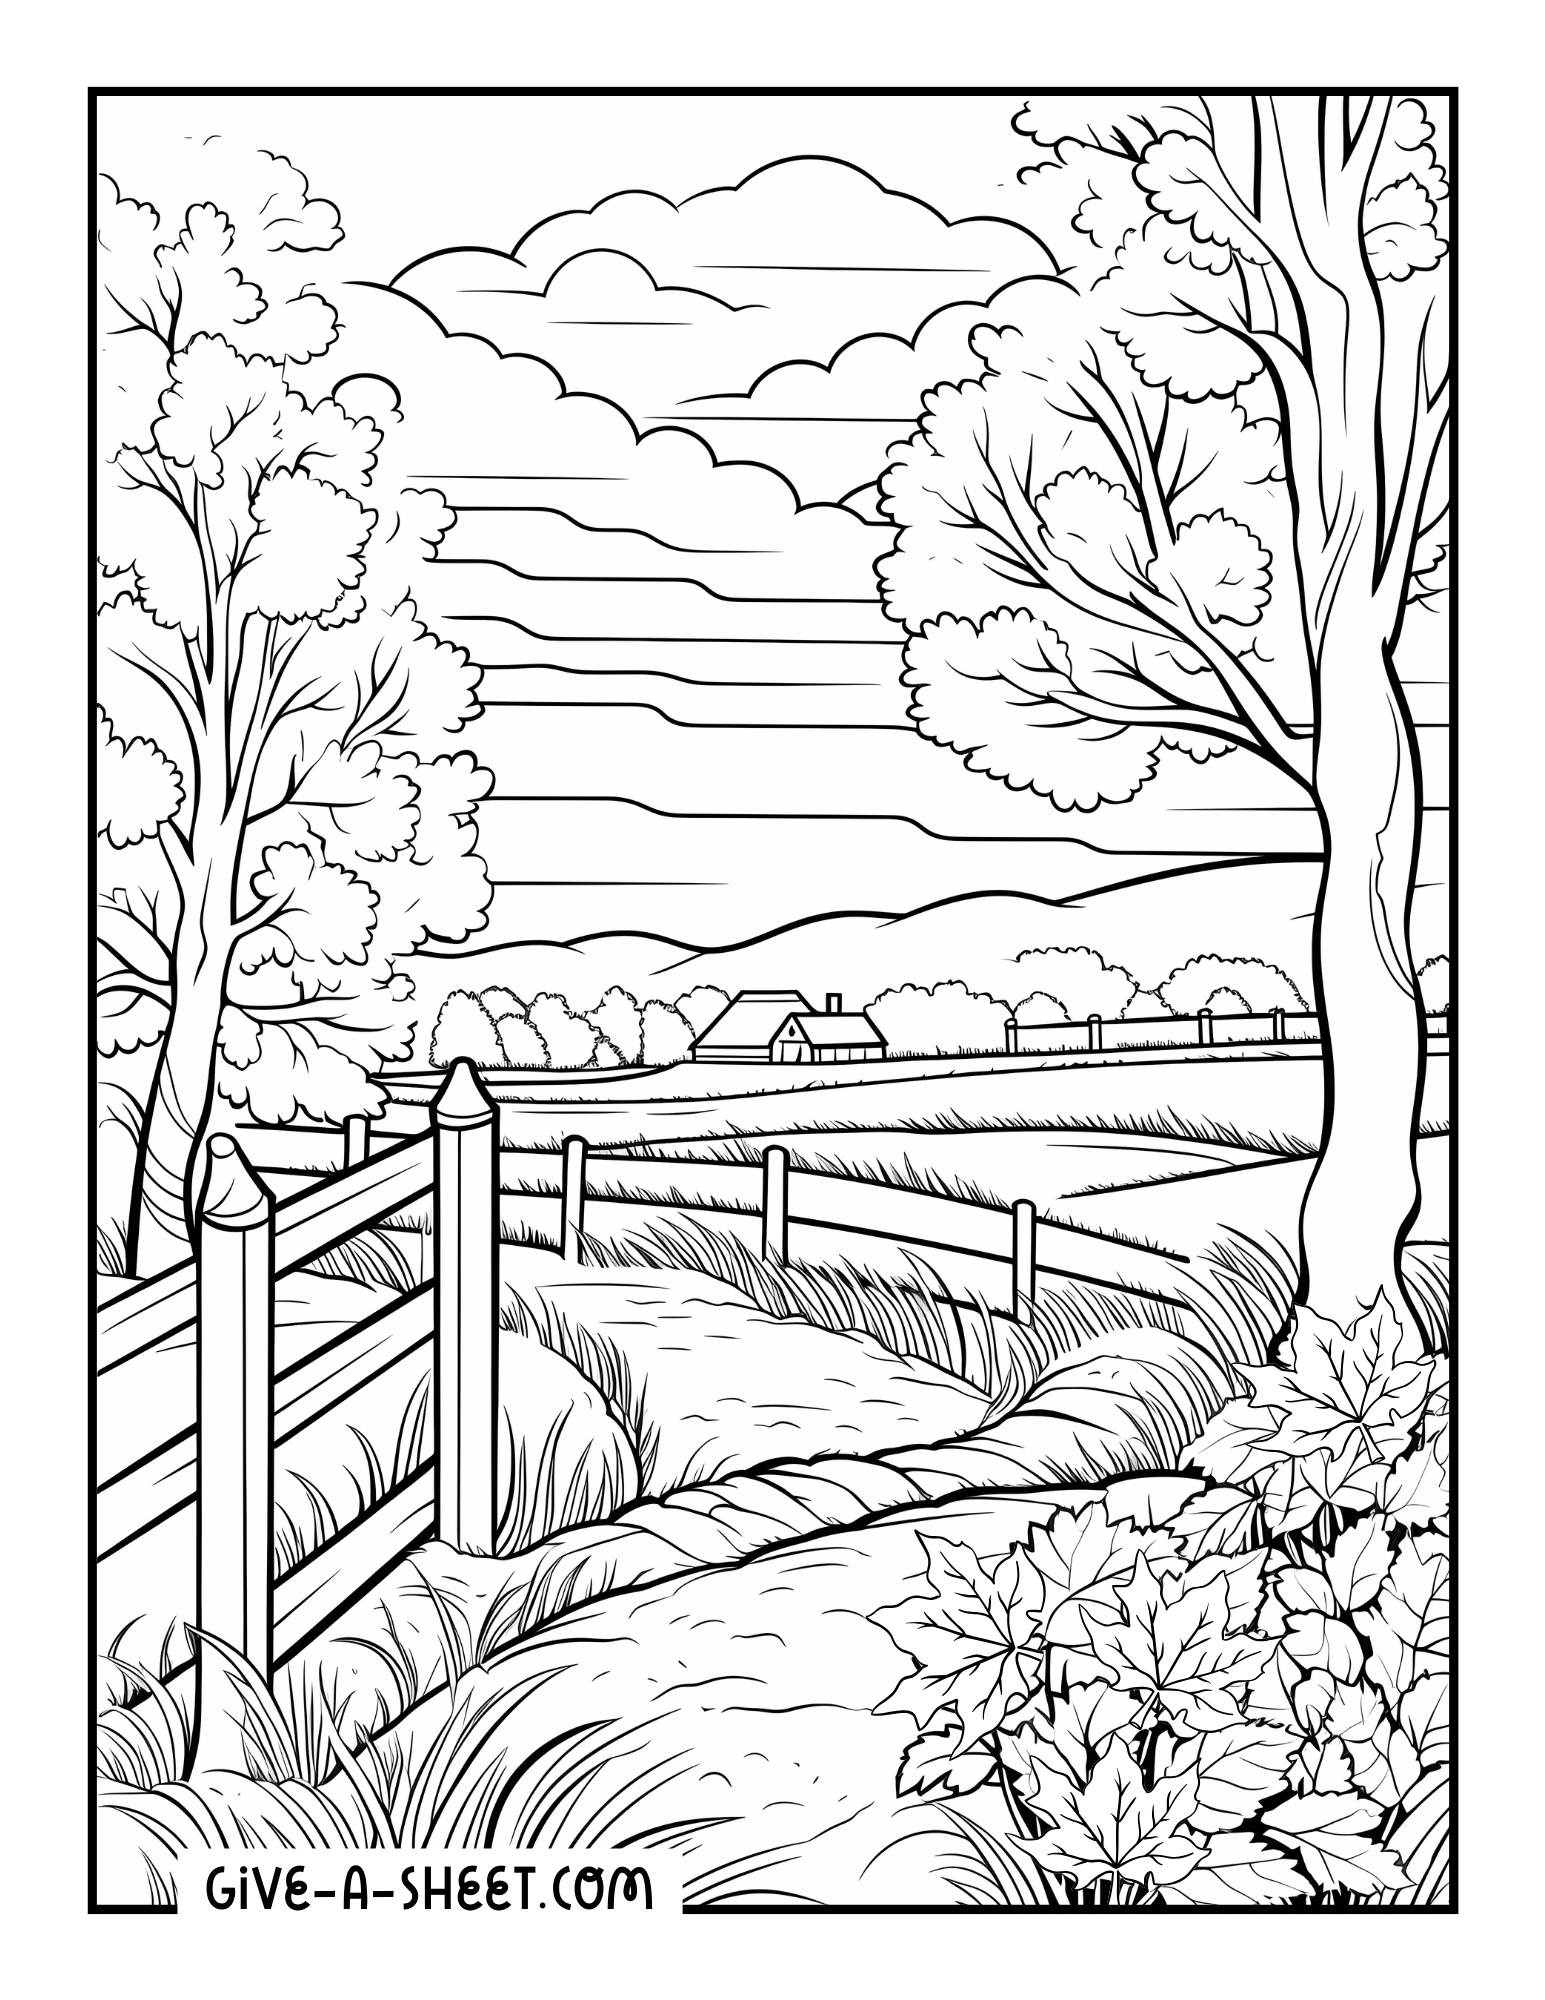 Various types of trees coloring page.